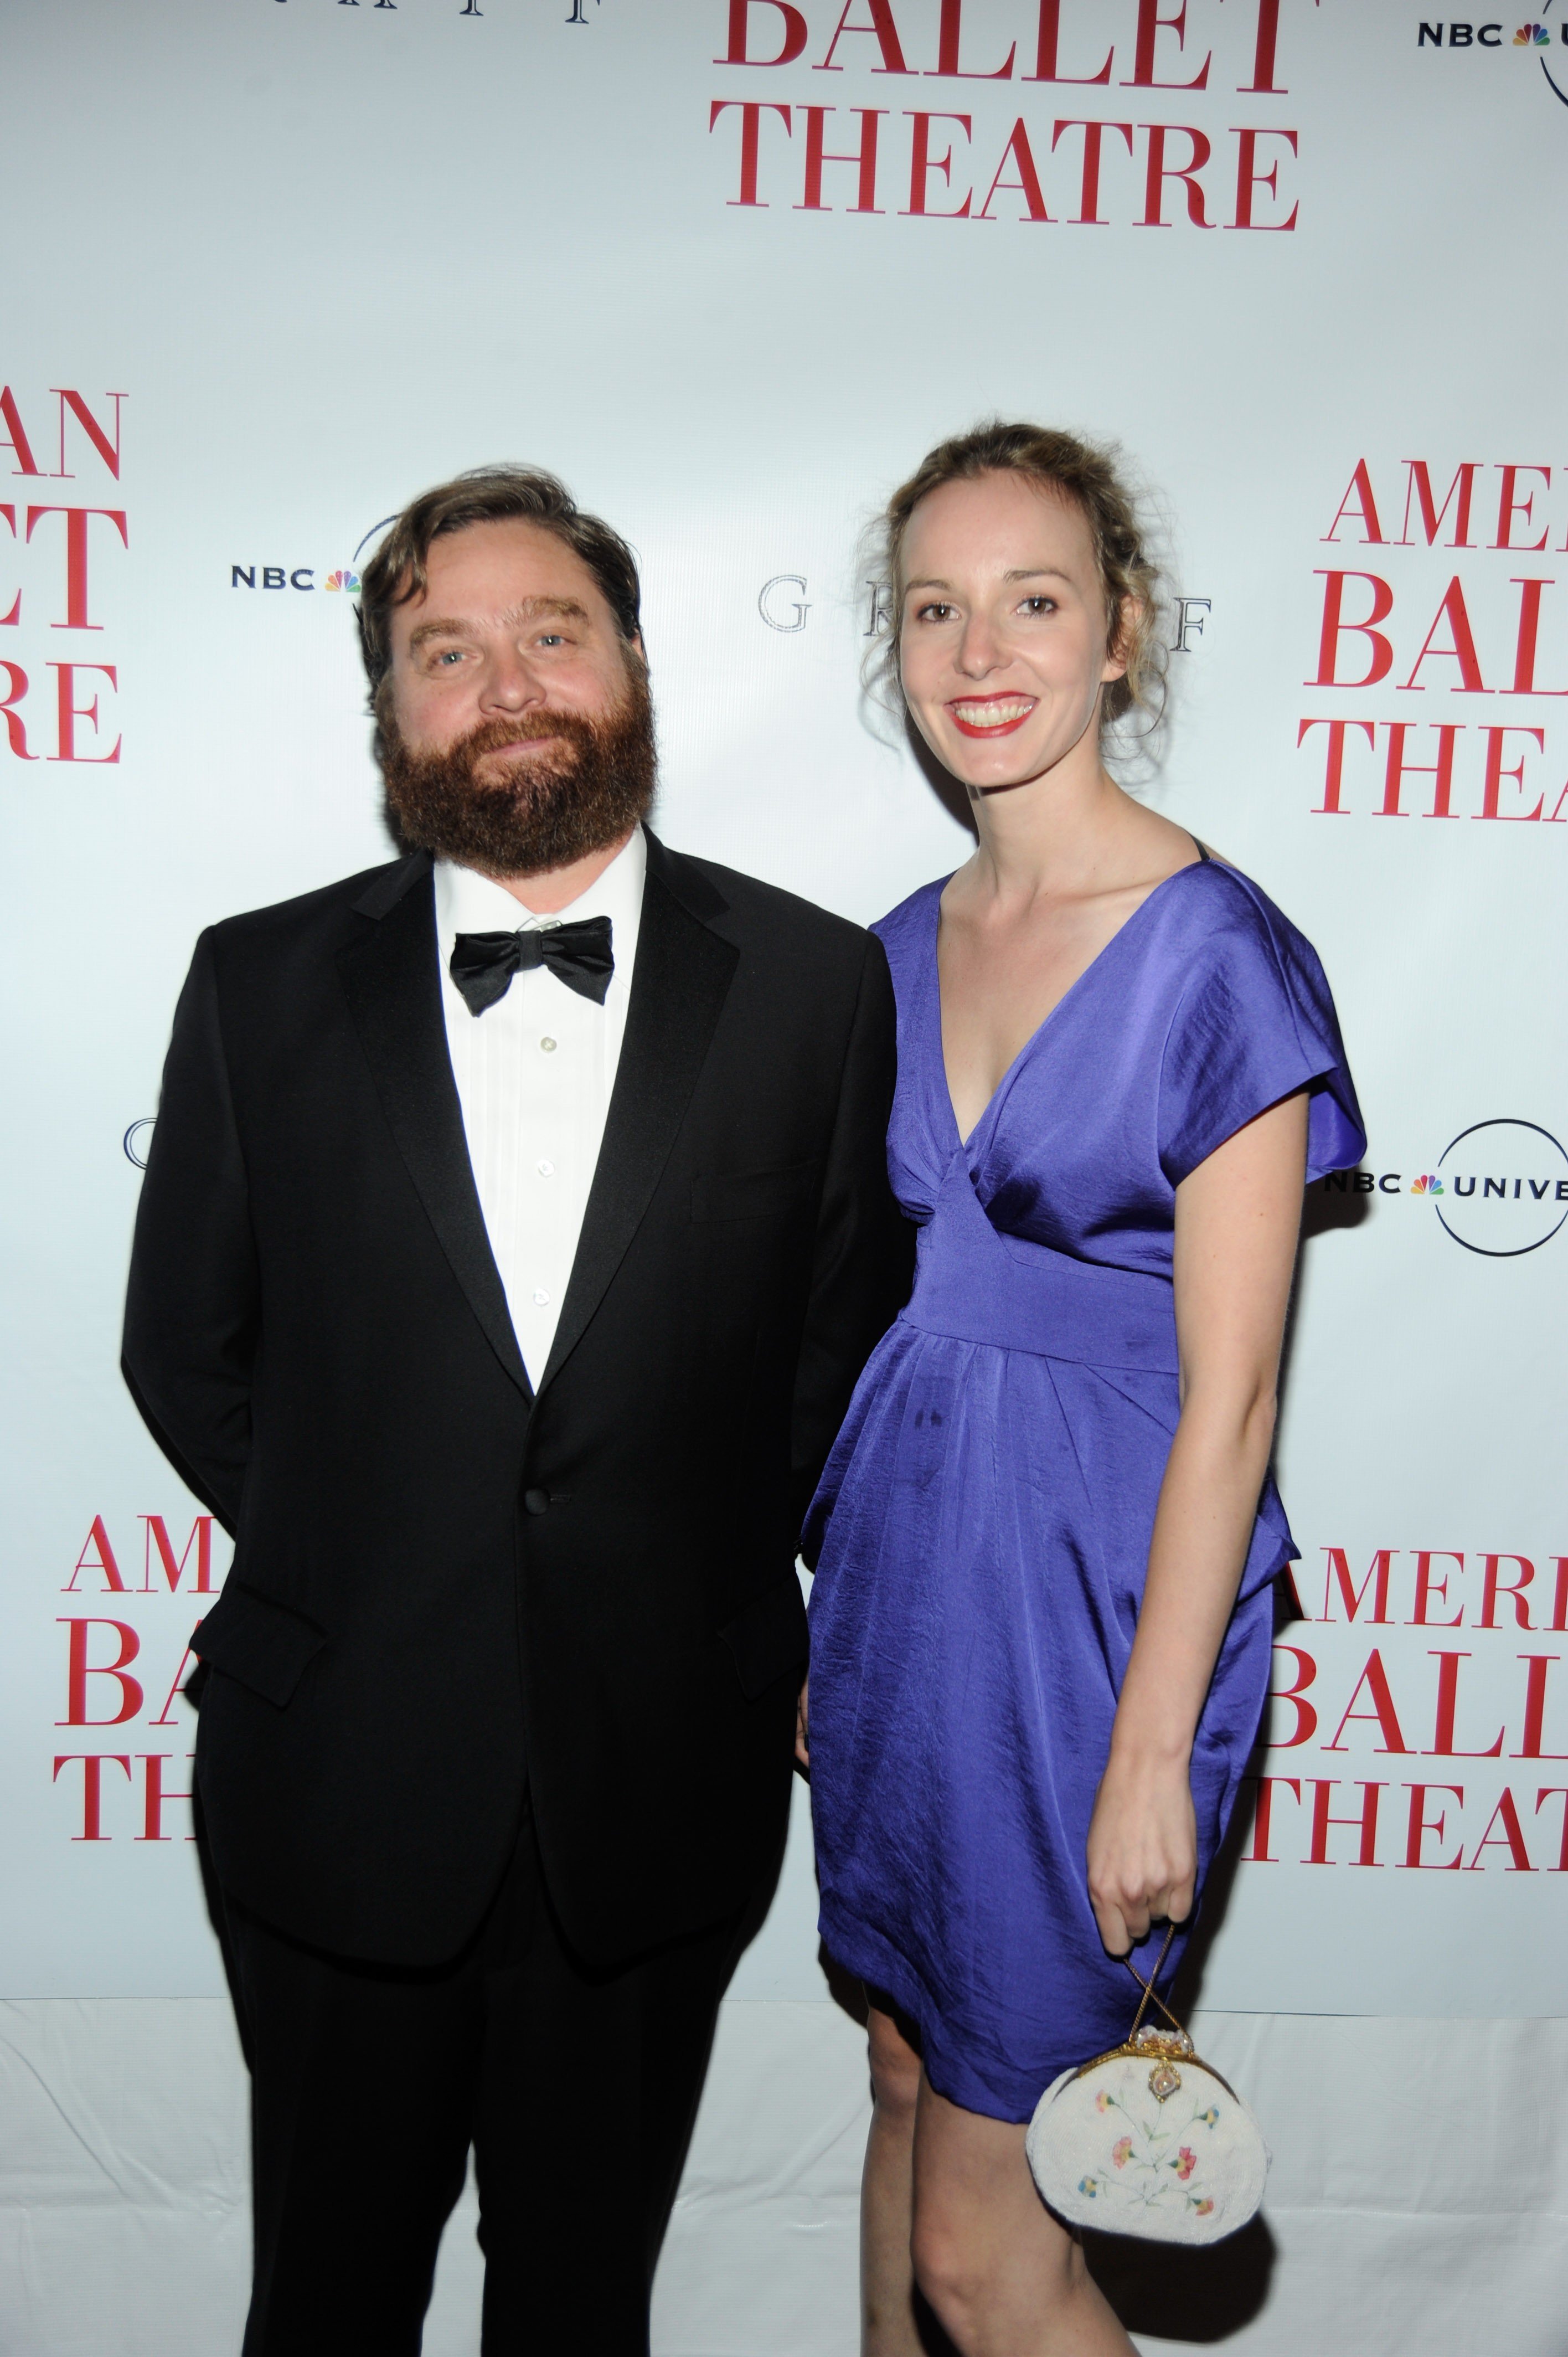 Zach Galifianakis and Quinn Lundberg attend AMERICAN BALLET THEATRE Celebrates the opening of their 70th Anniversary Season with their Annual Spring Gala at The Metropolitan Opera House on May 17, 2010 in New York City. | Source: Getty Images 